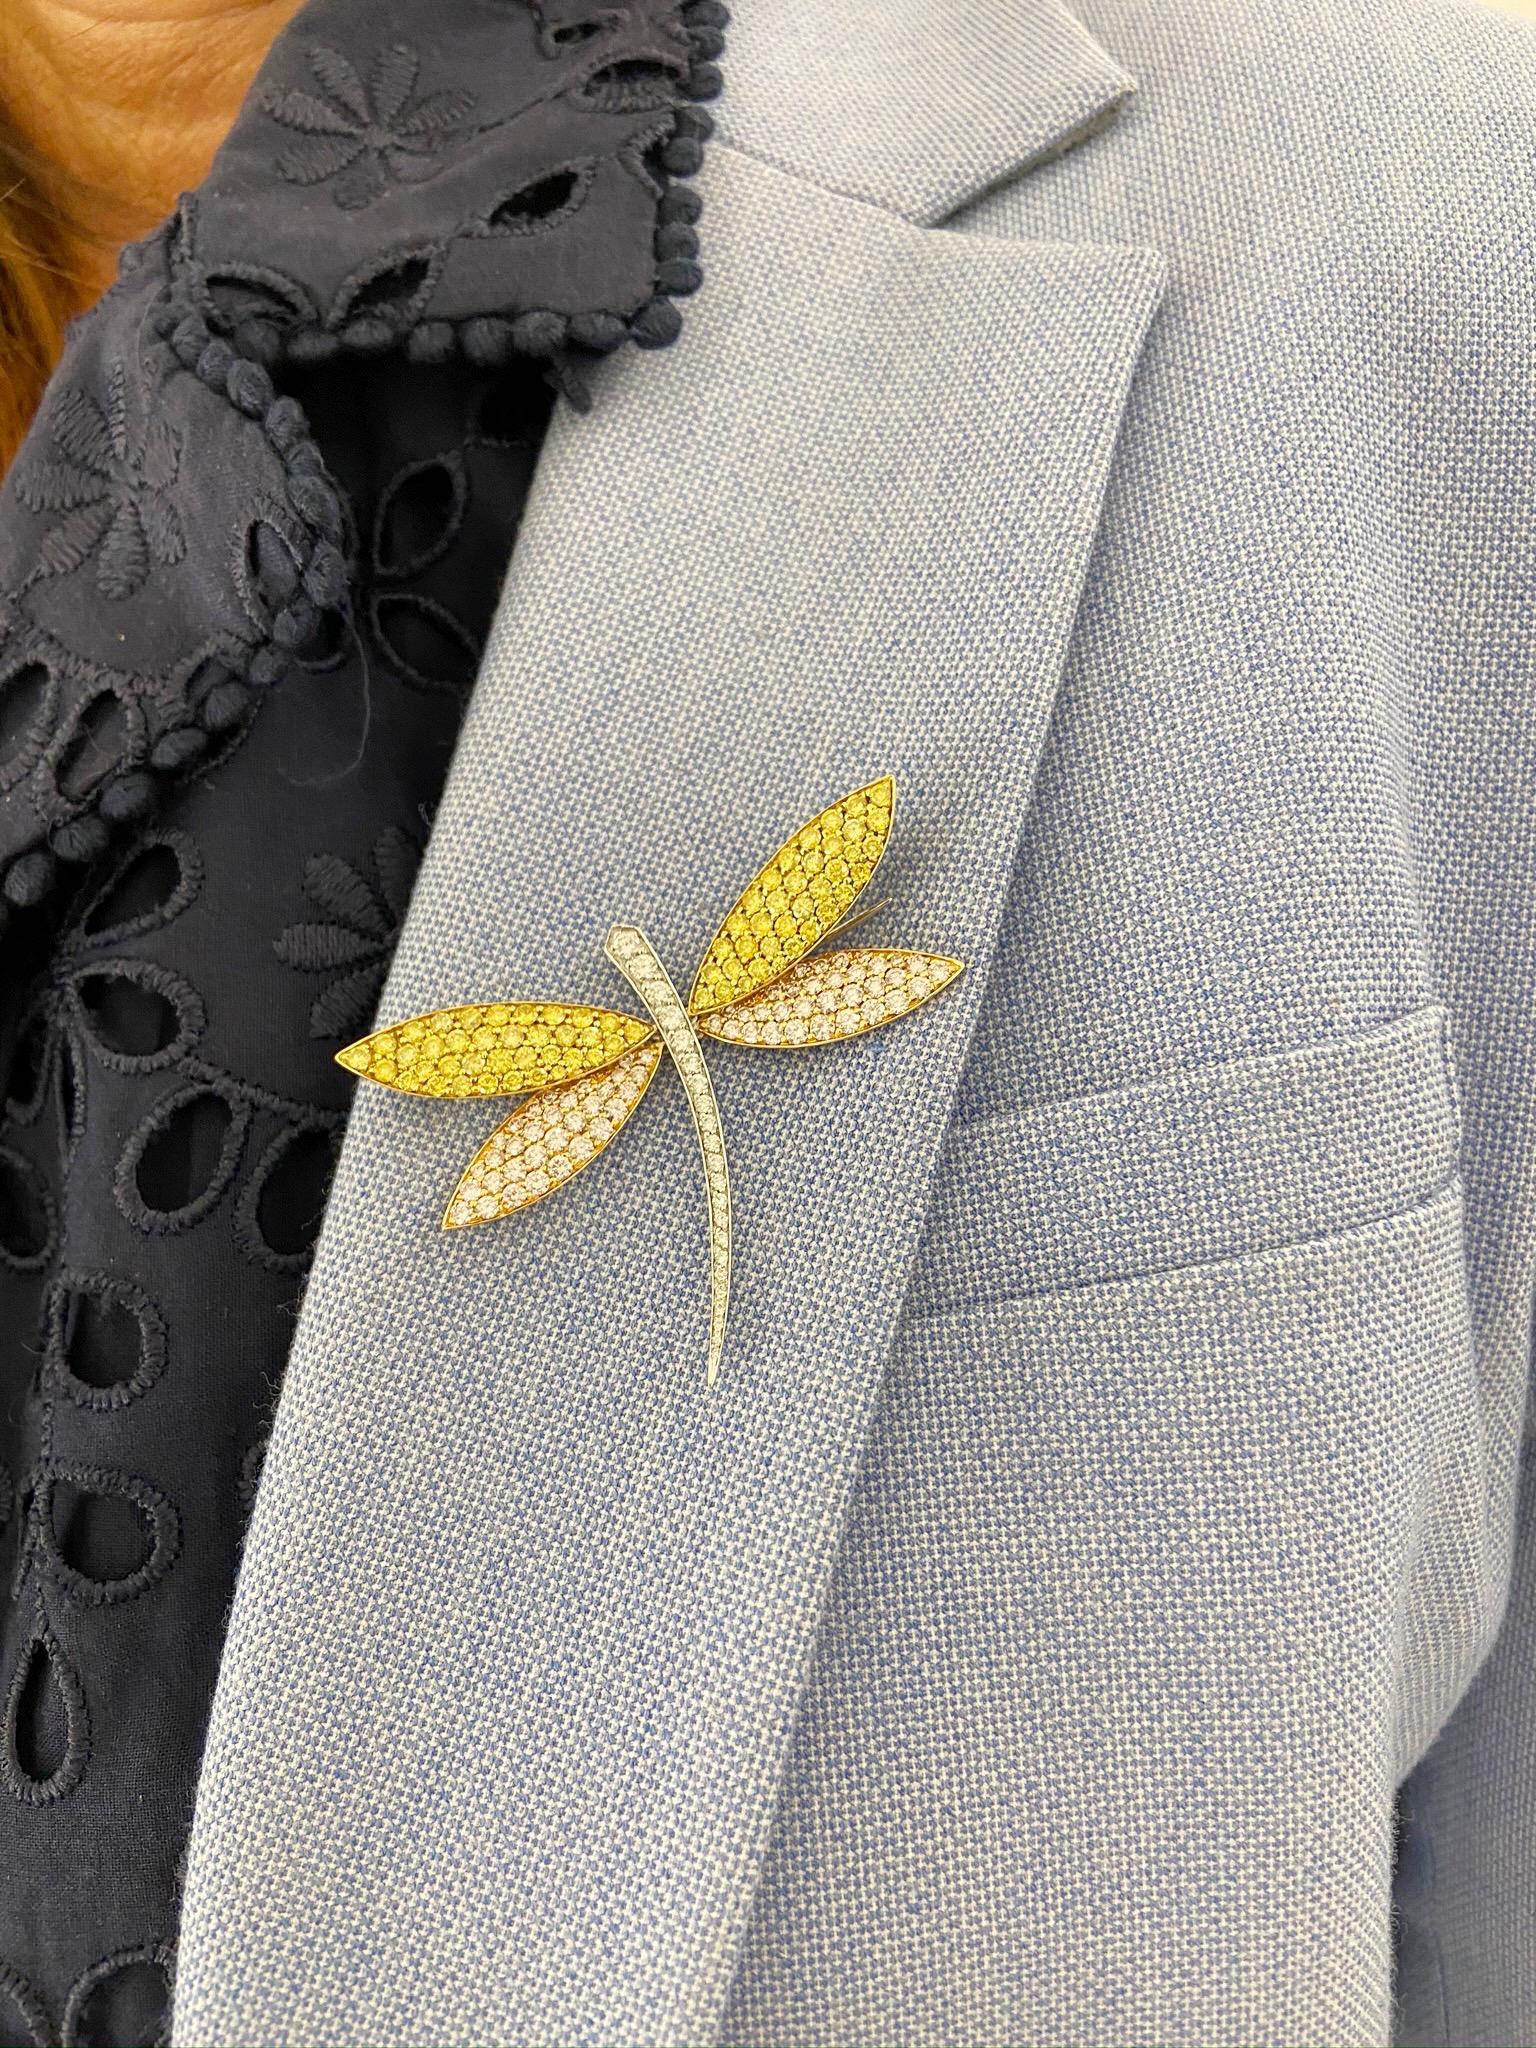 Women's or Men's Cellini 18KT Gold Dragonfly Brooch with Natural Pink, Yellow and White Diamonds